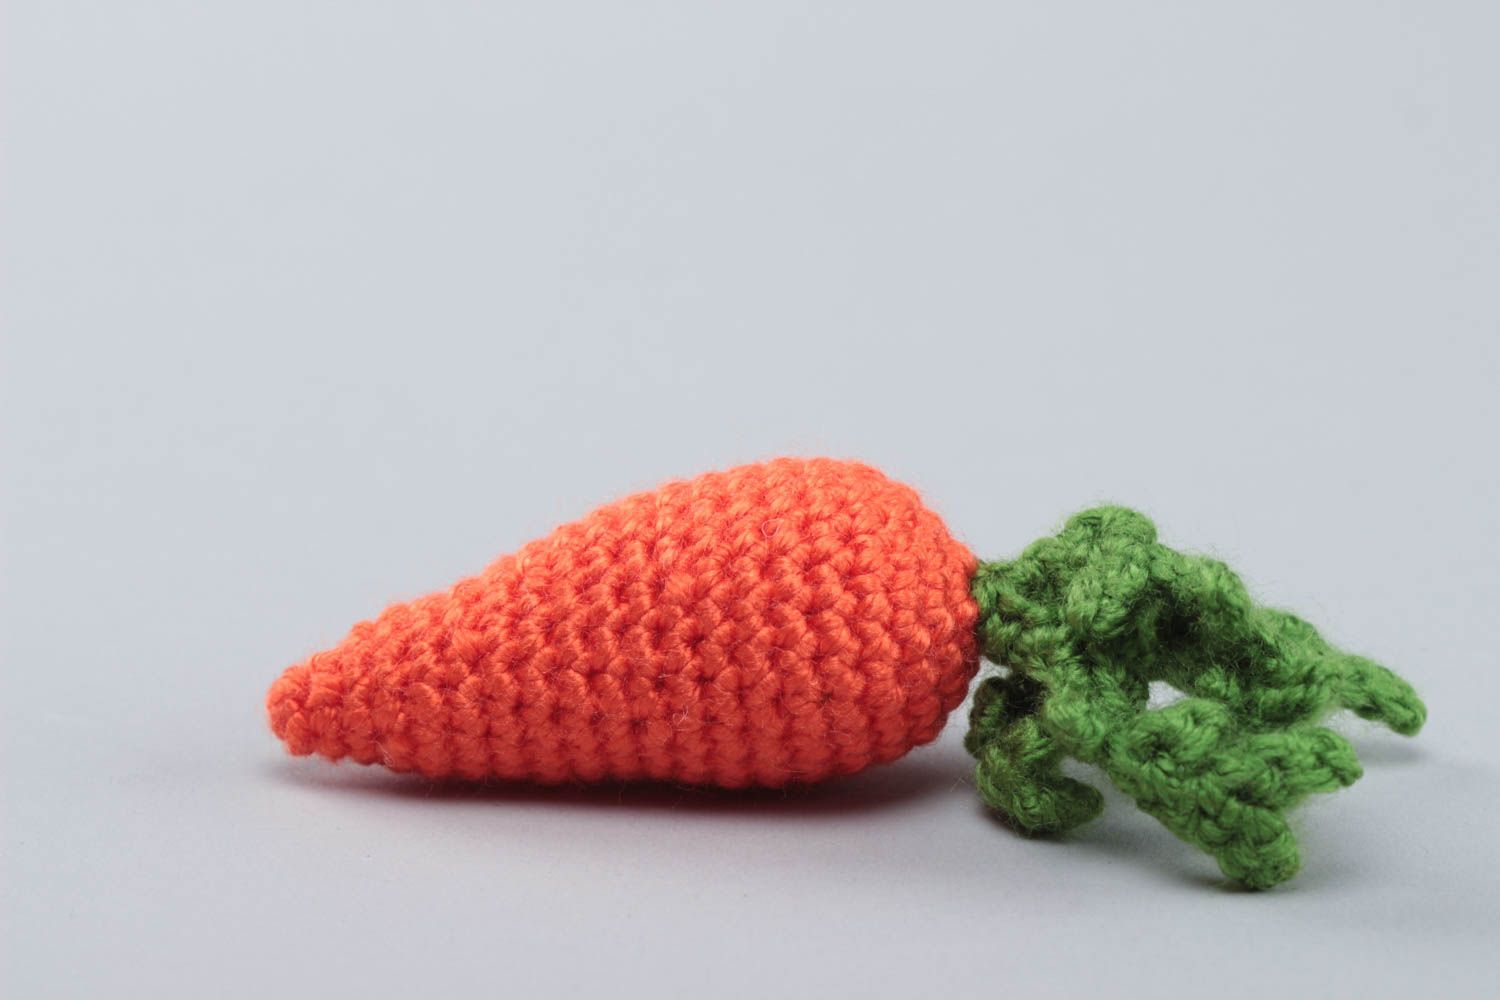 Handmade small acrylic crochet soft toy orange carrot for kids and kitchen decor photo 2